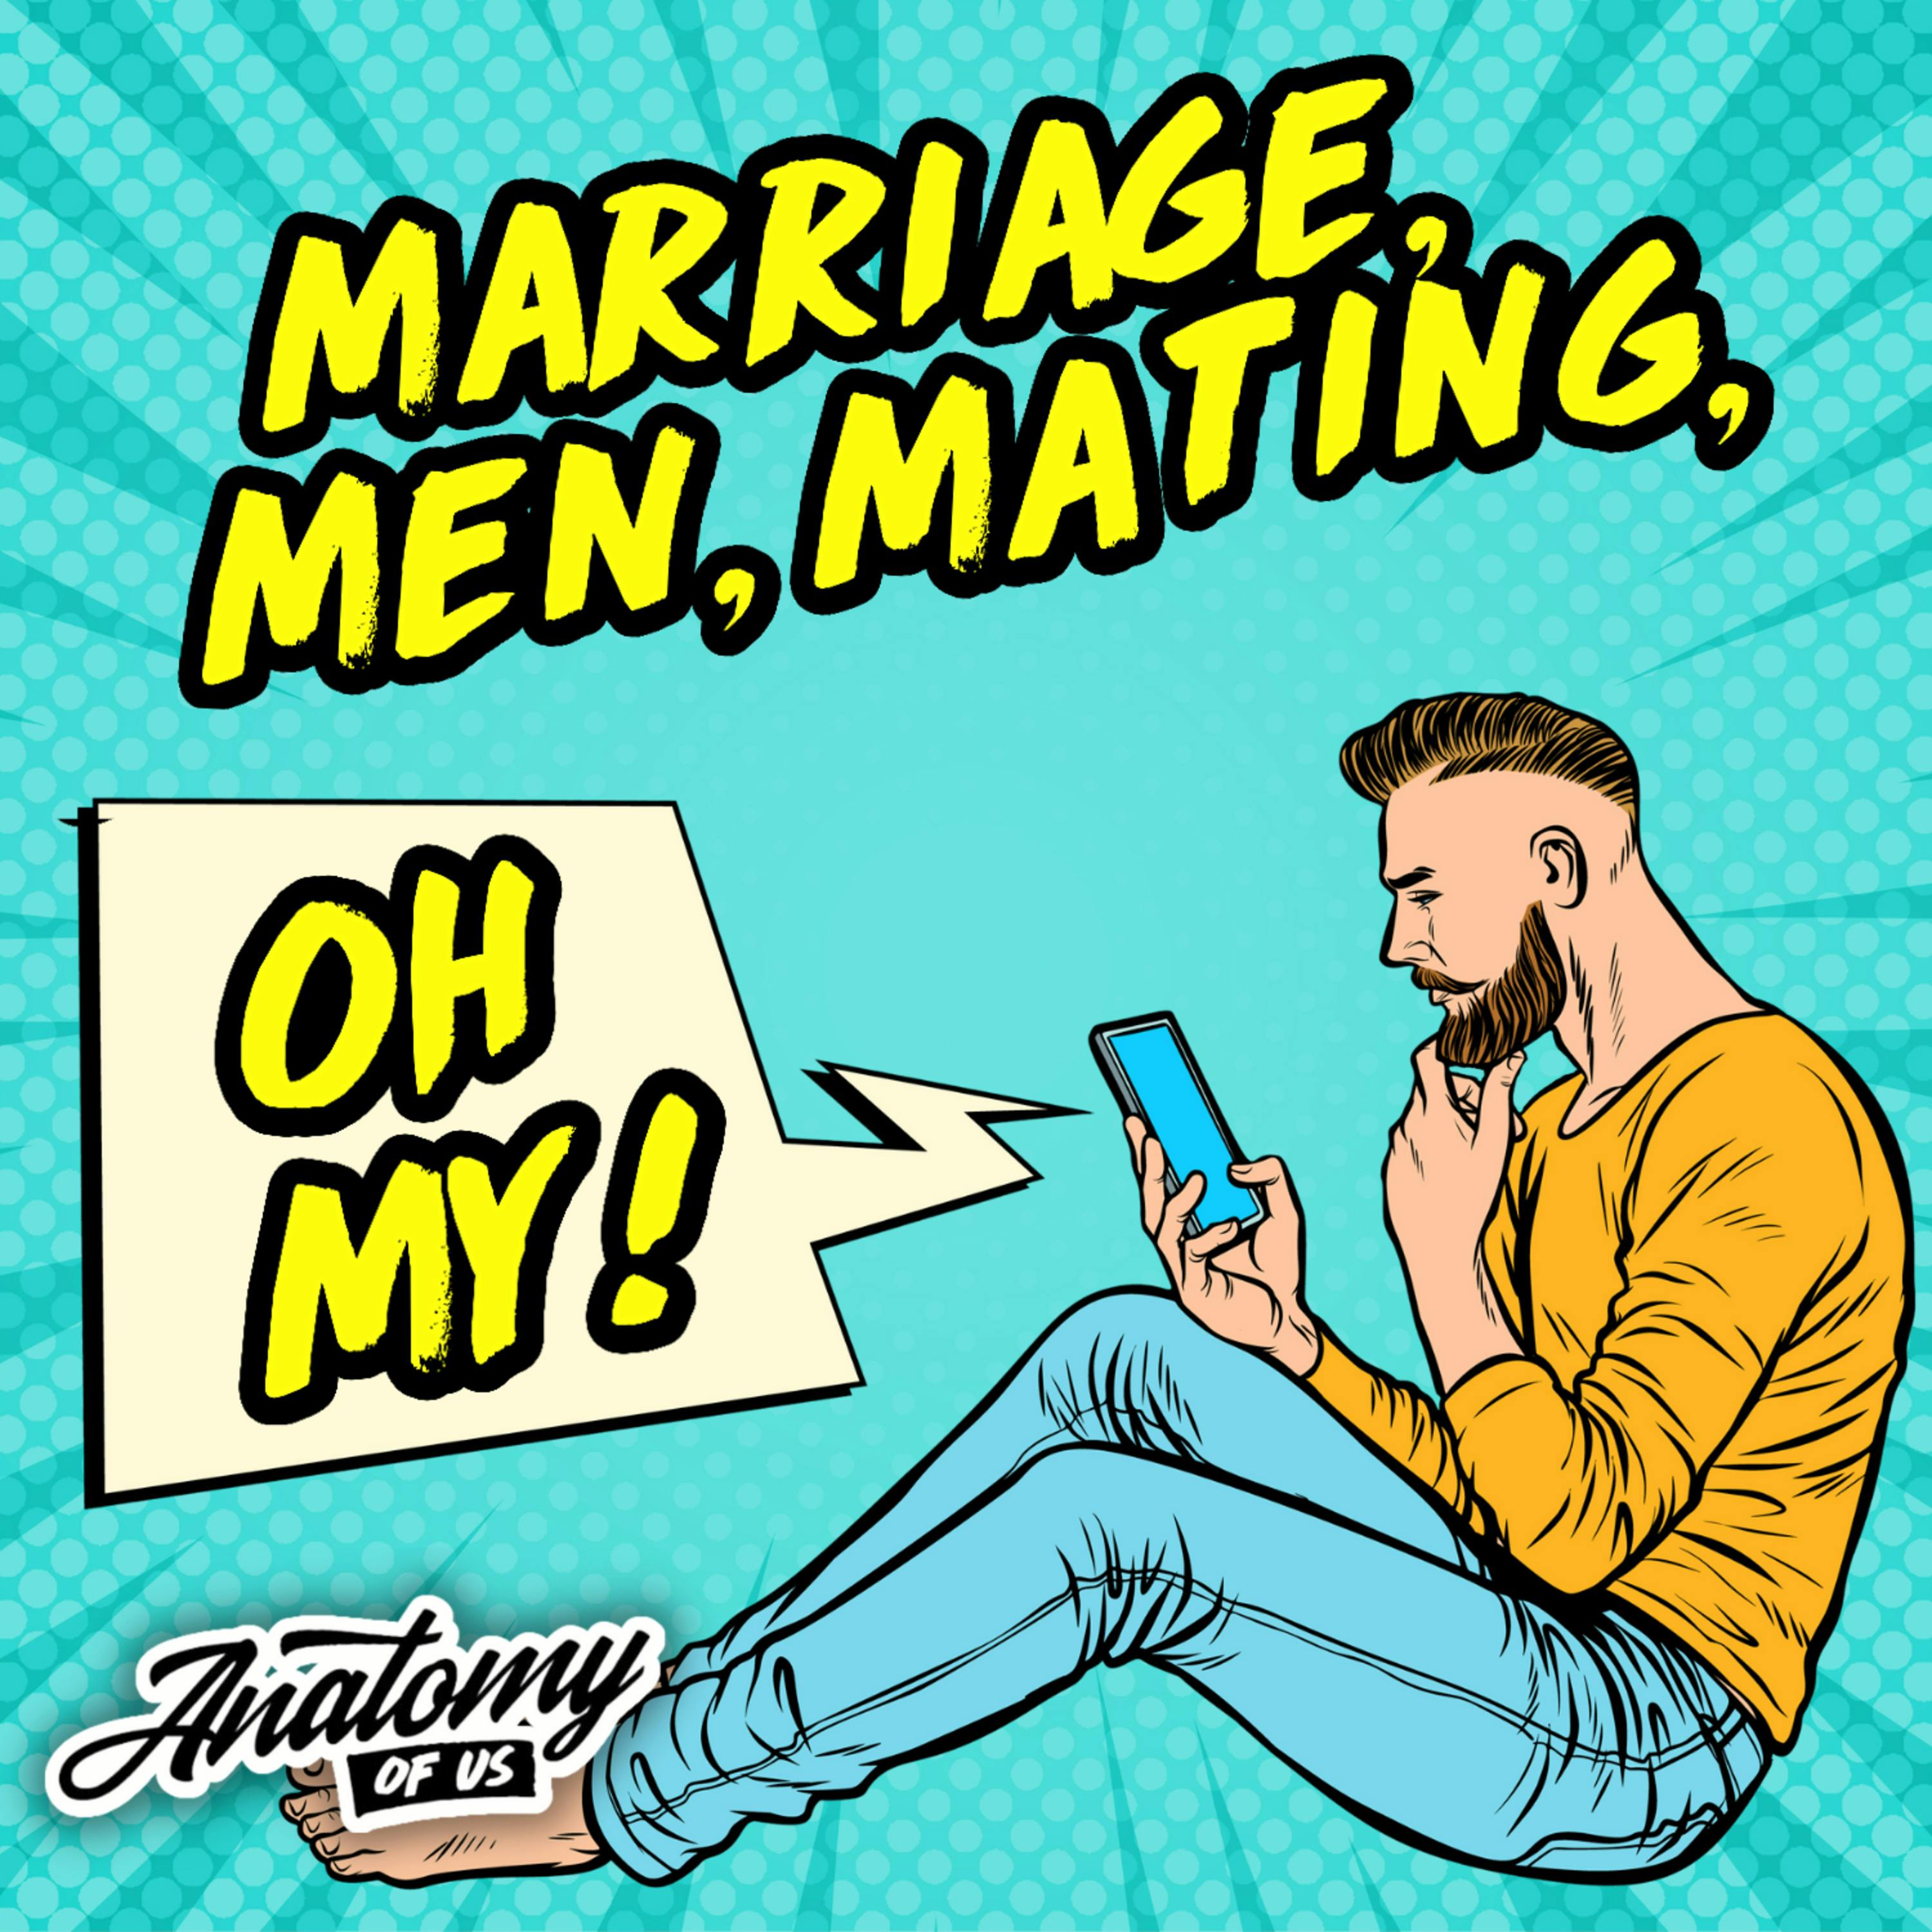 Men, Marriage, and Mating, Oh My!